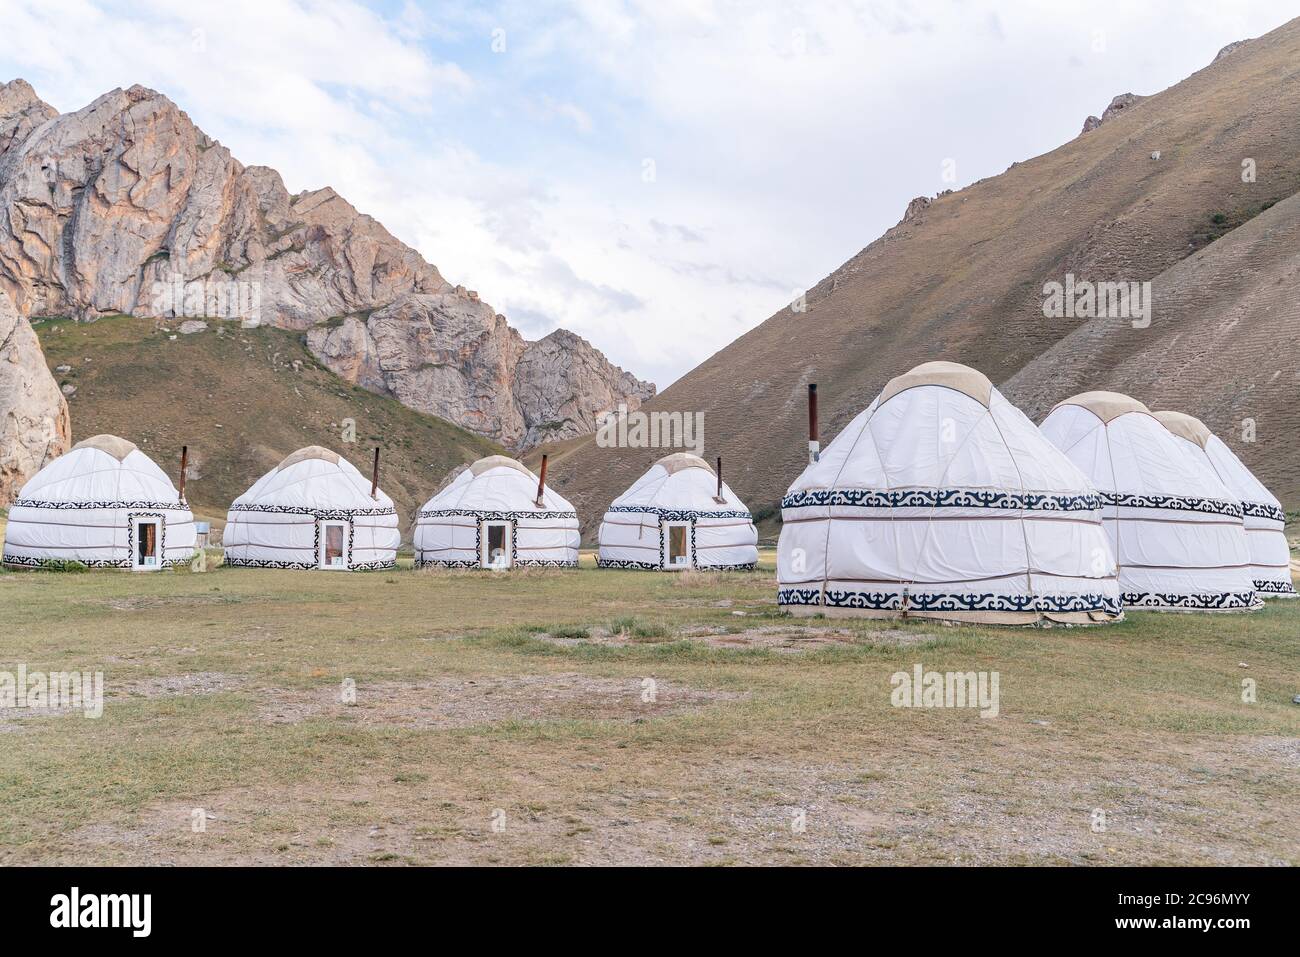 The view of yurts nomad village in Tash-Rabat in Kyrgyzstan Stock Photo